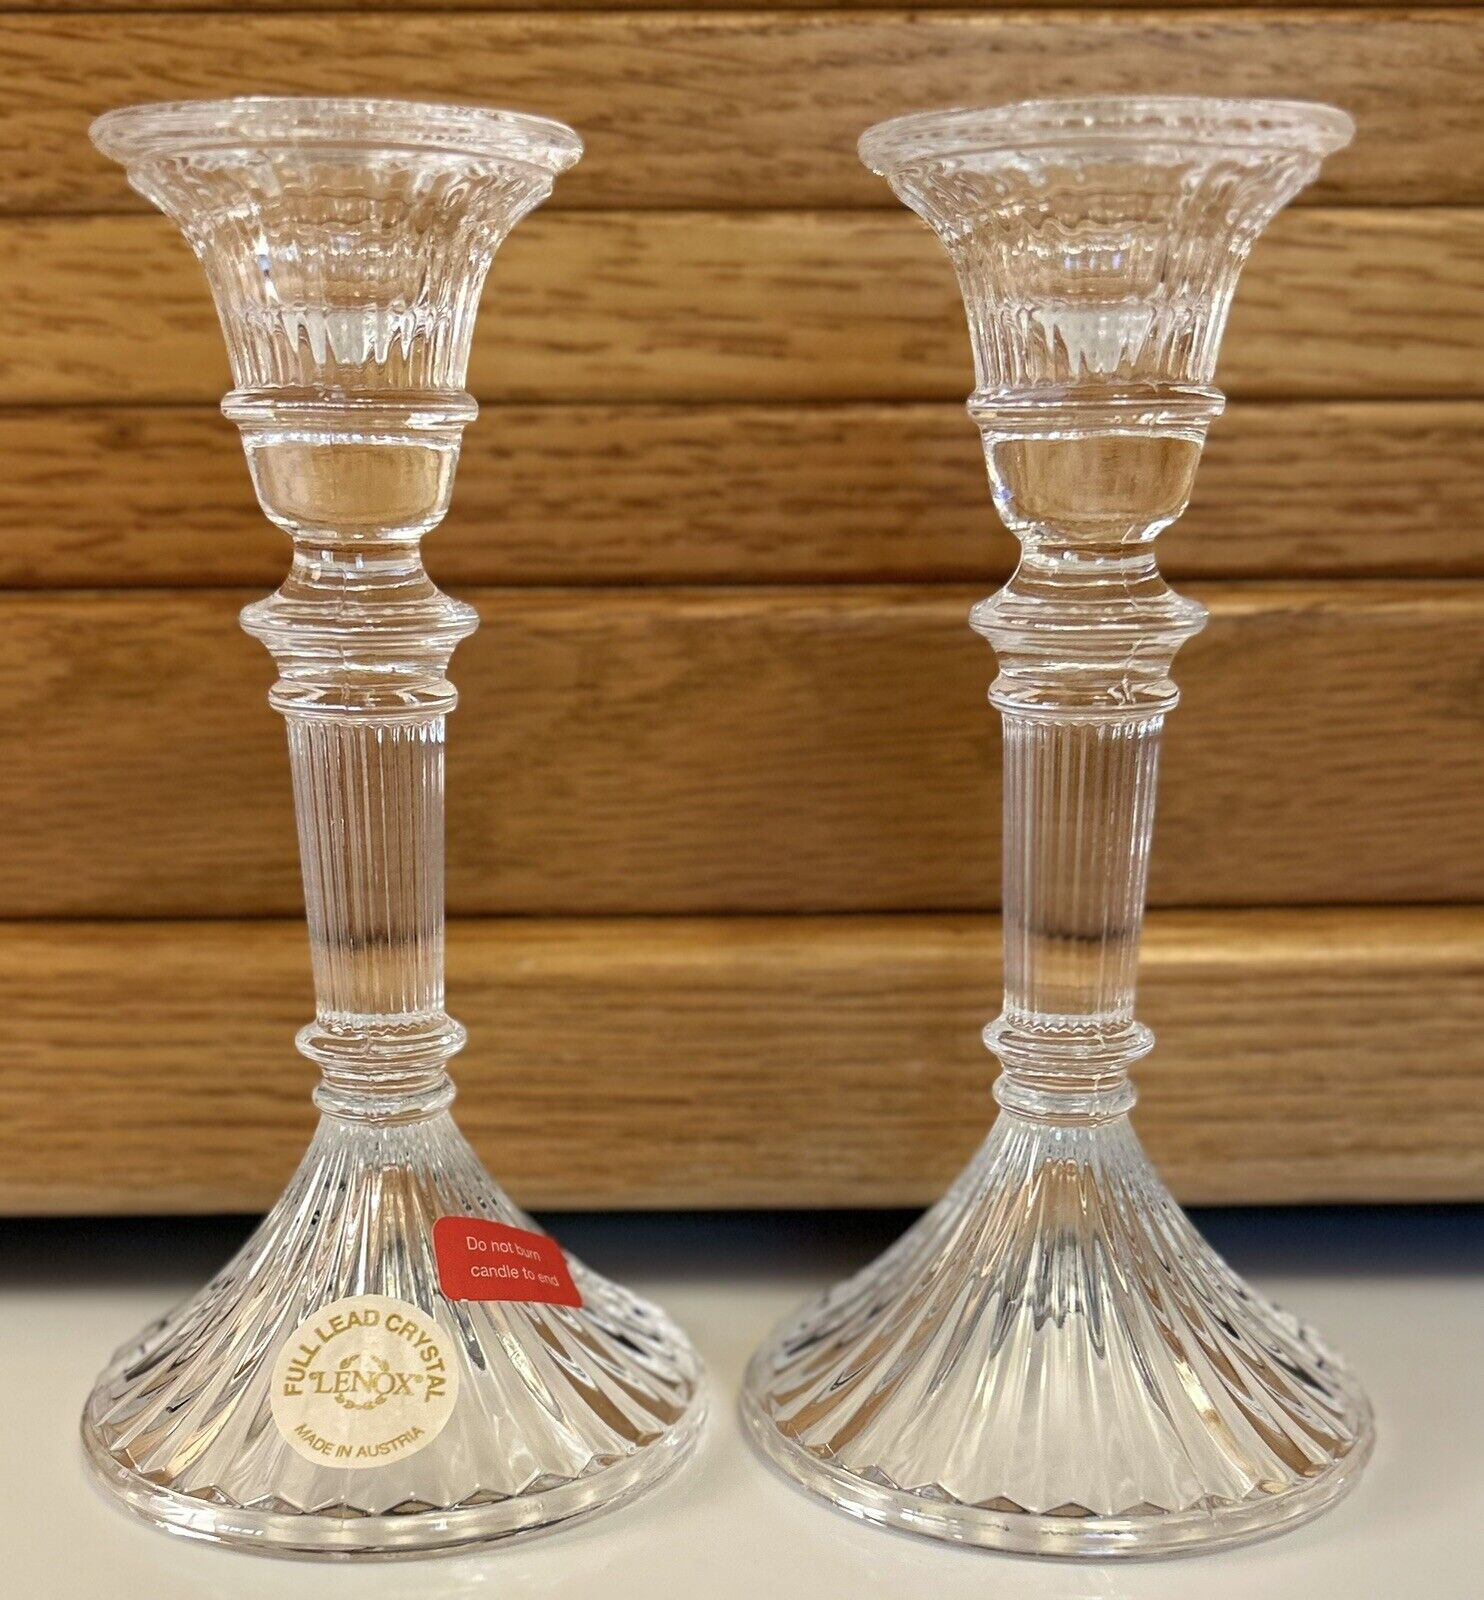 Vintage LENOX Full Lead Crystal Candlestick Pair, #781500, Made In Austria